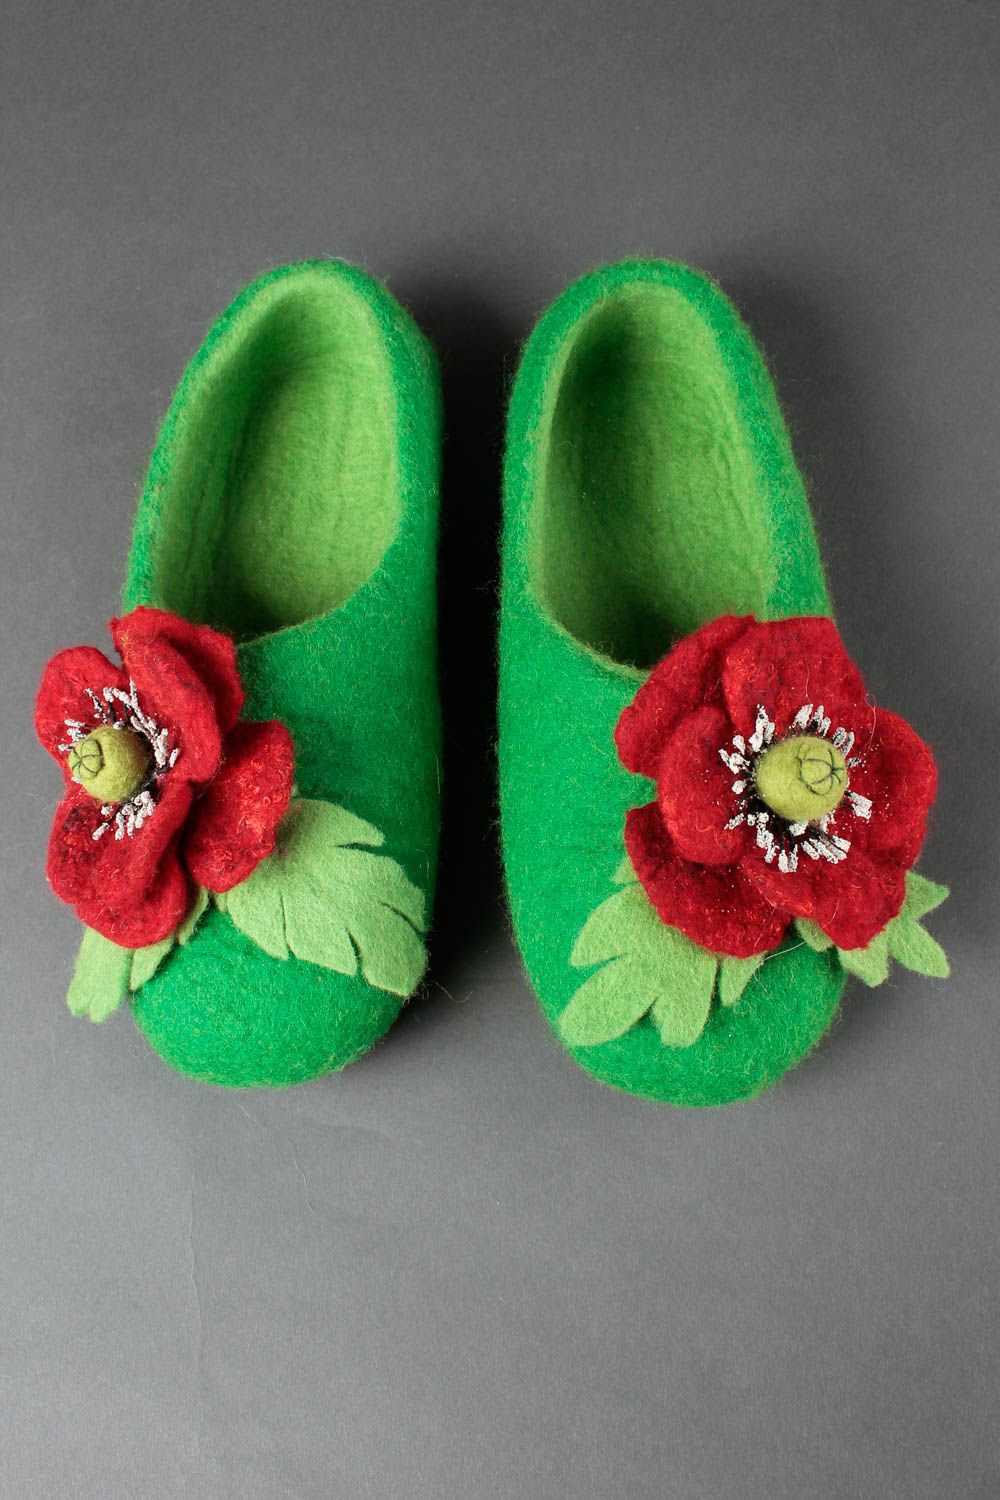 Handmade felted green slippers home woolen slippers warm stylish present  photo 2